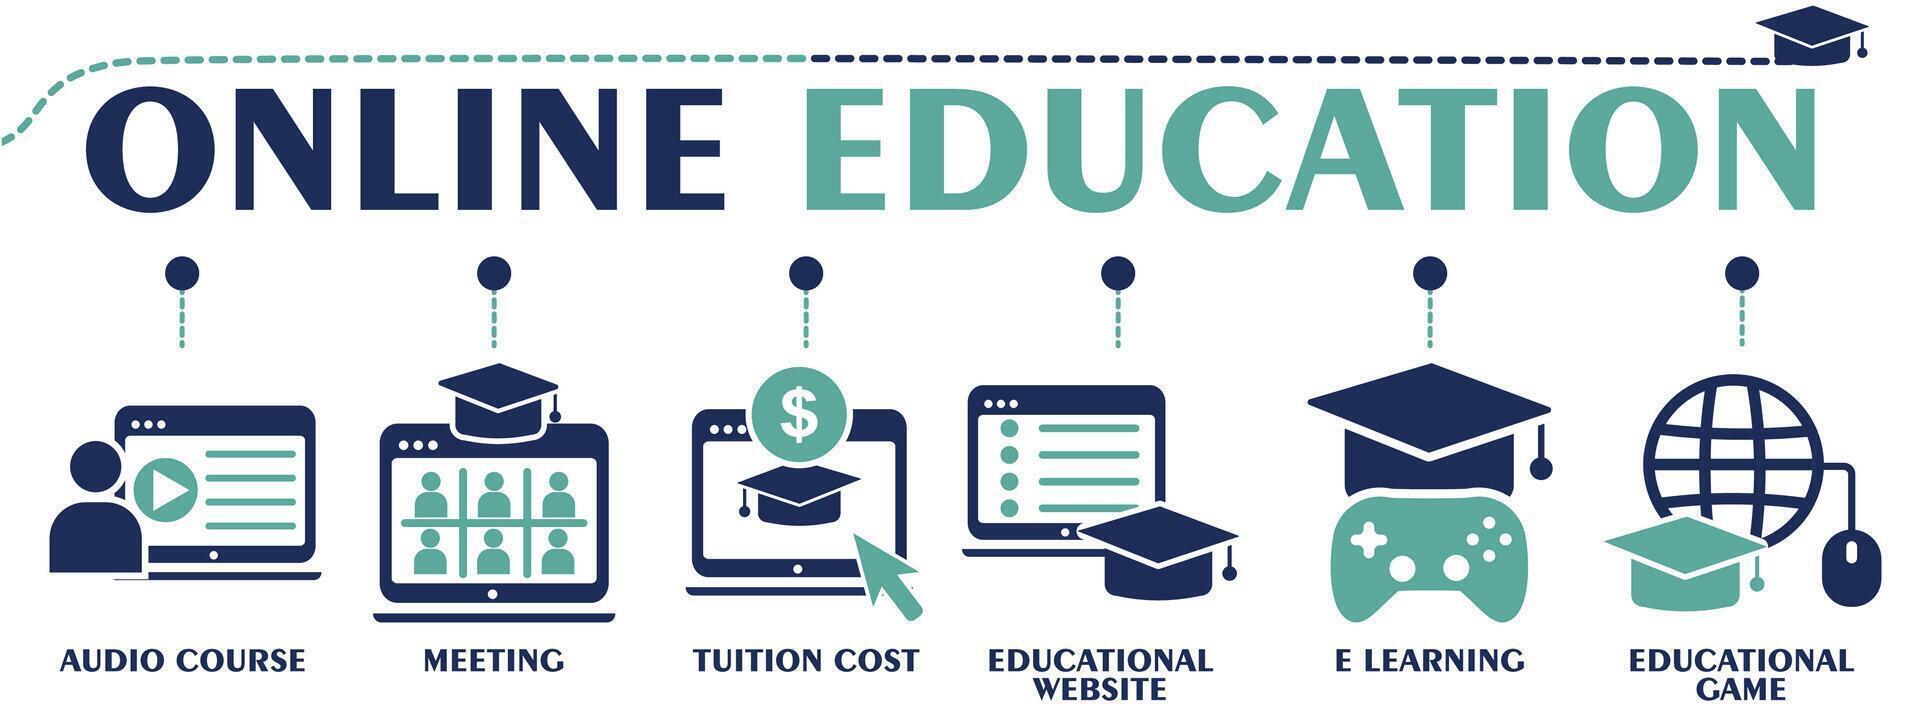 Online education banner web solid icons. Vector illustration concept with an icon of audio course, meeting, tuition cost, educational website, educational game and e learning.